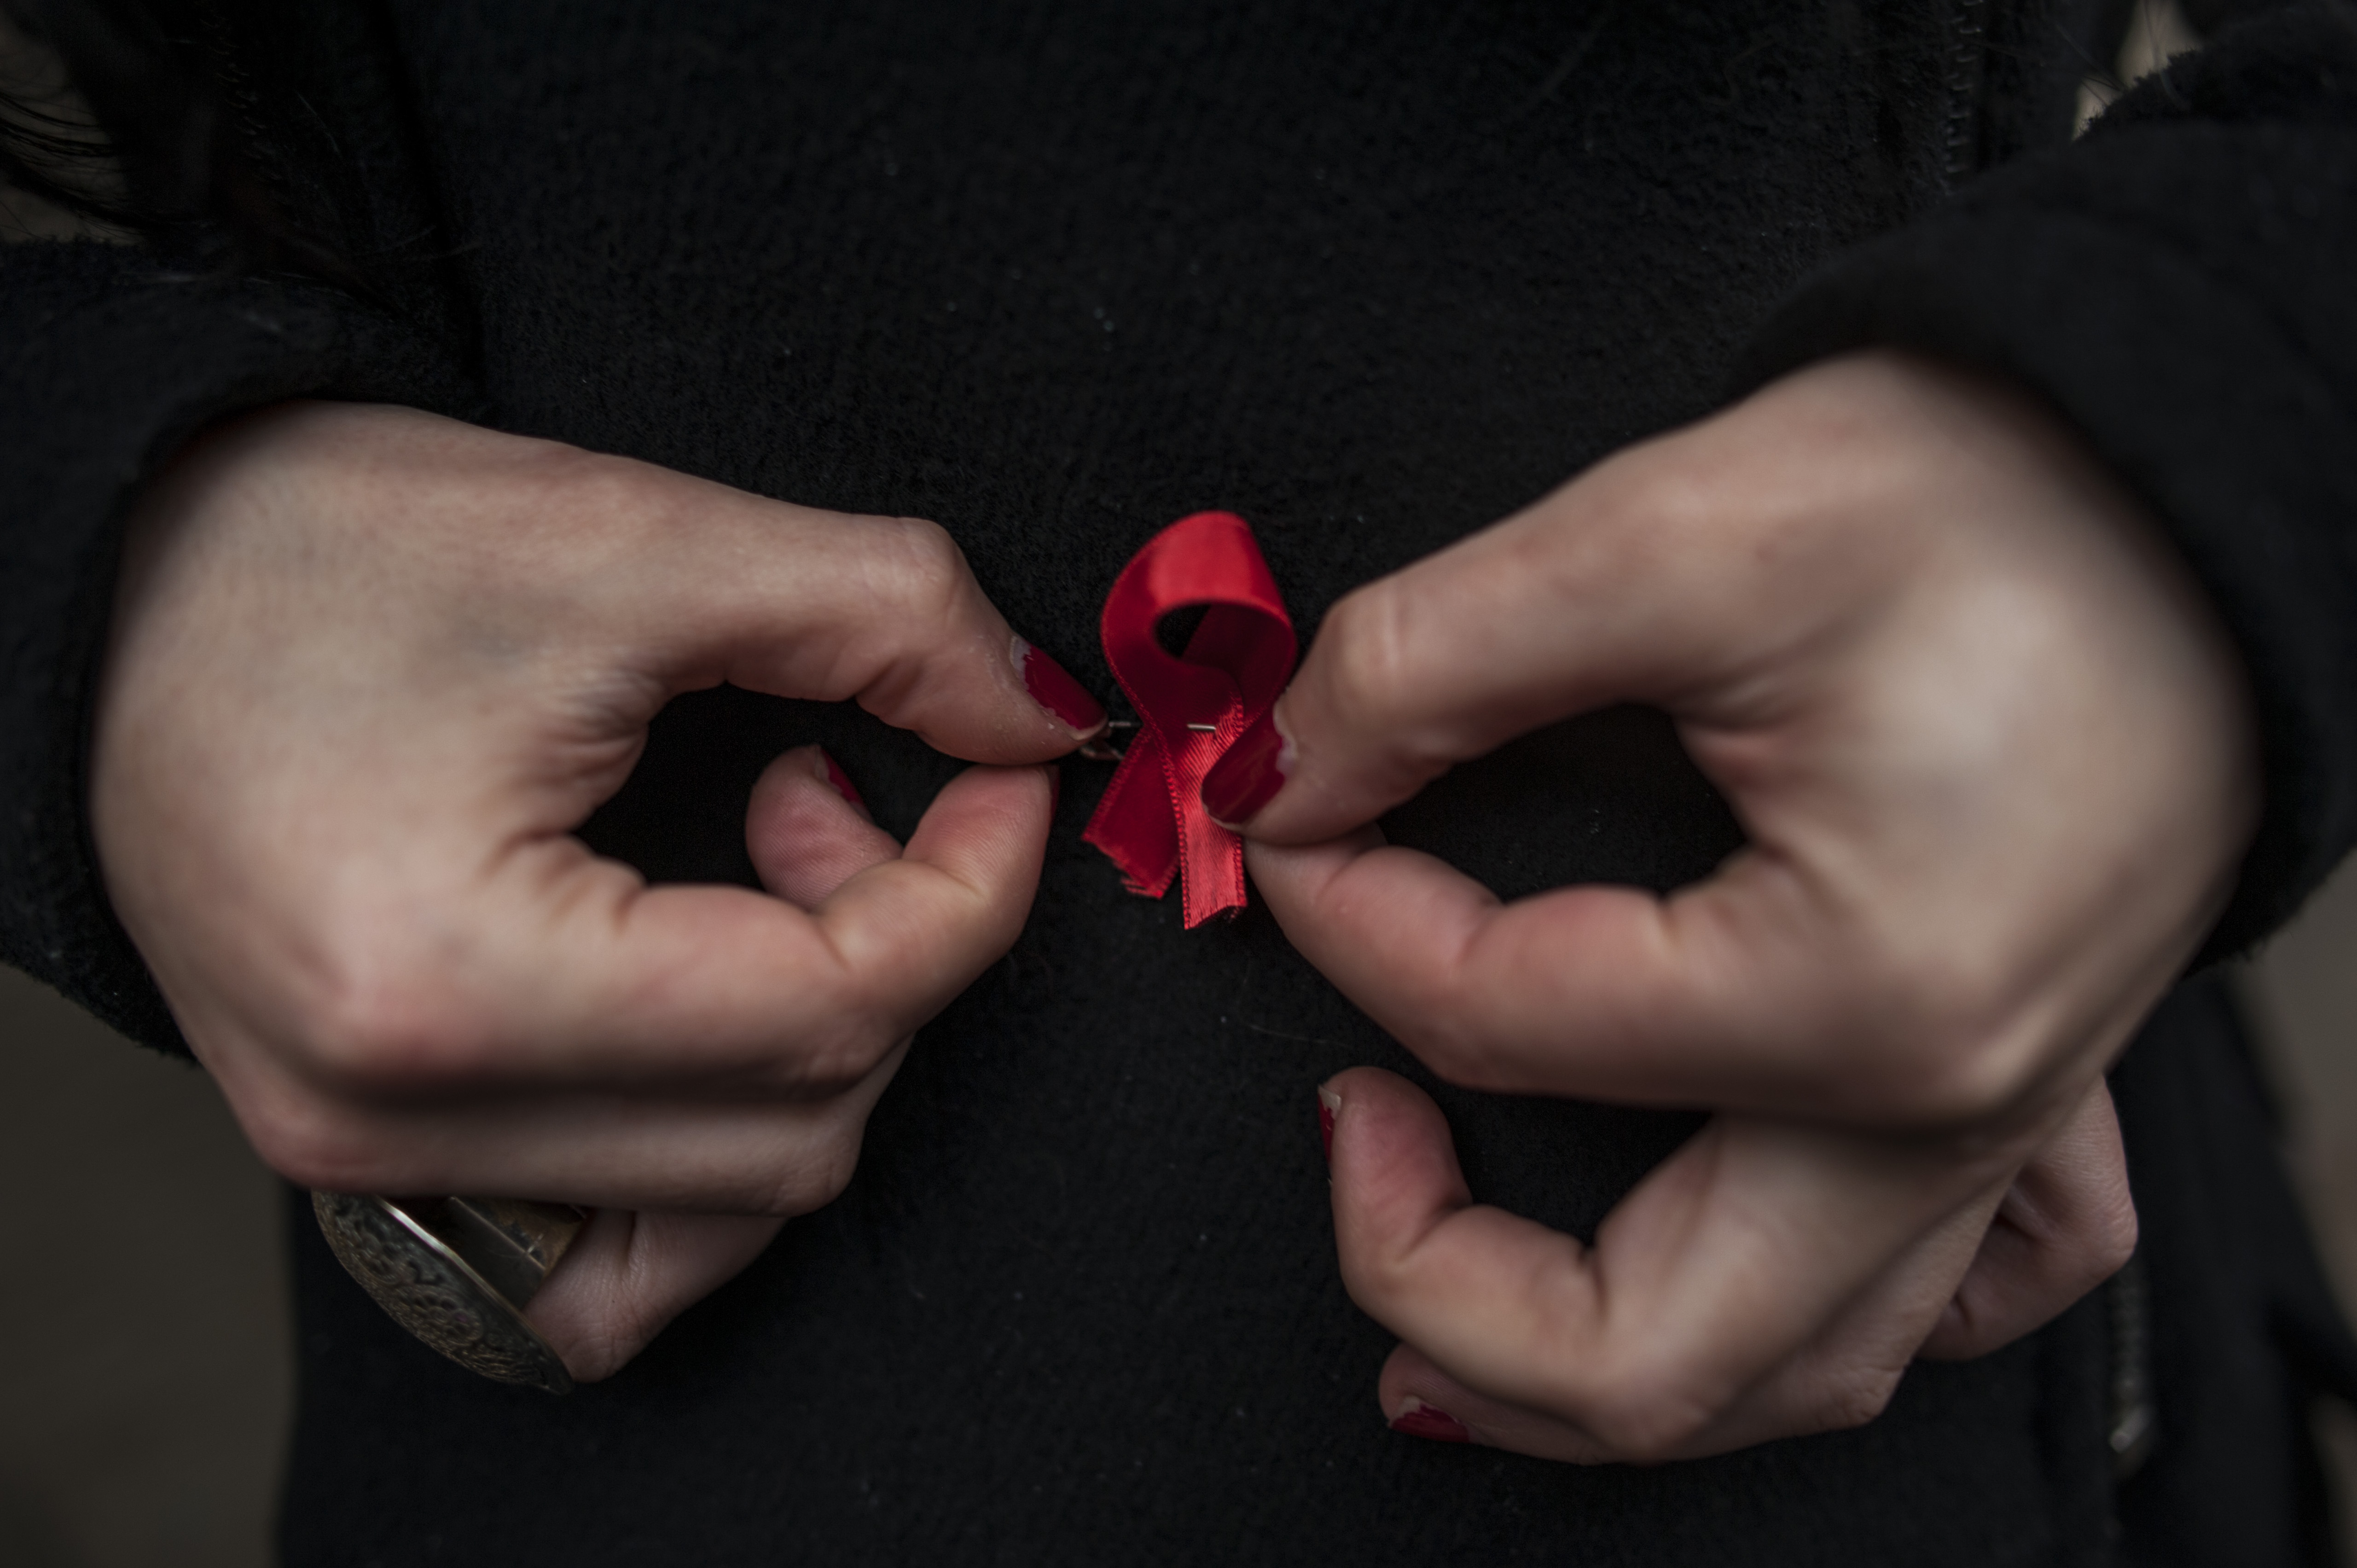 For World AIDS Day, the message is clear: Get tested